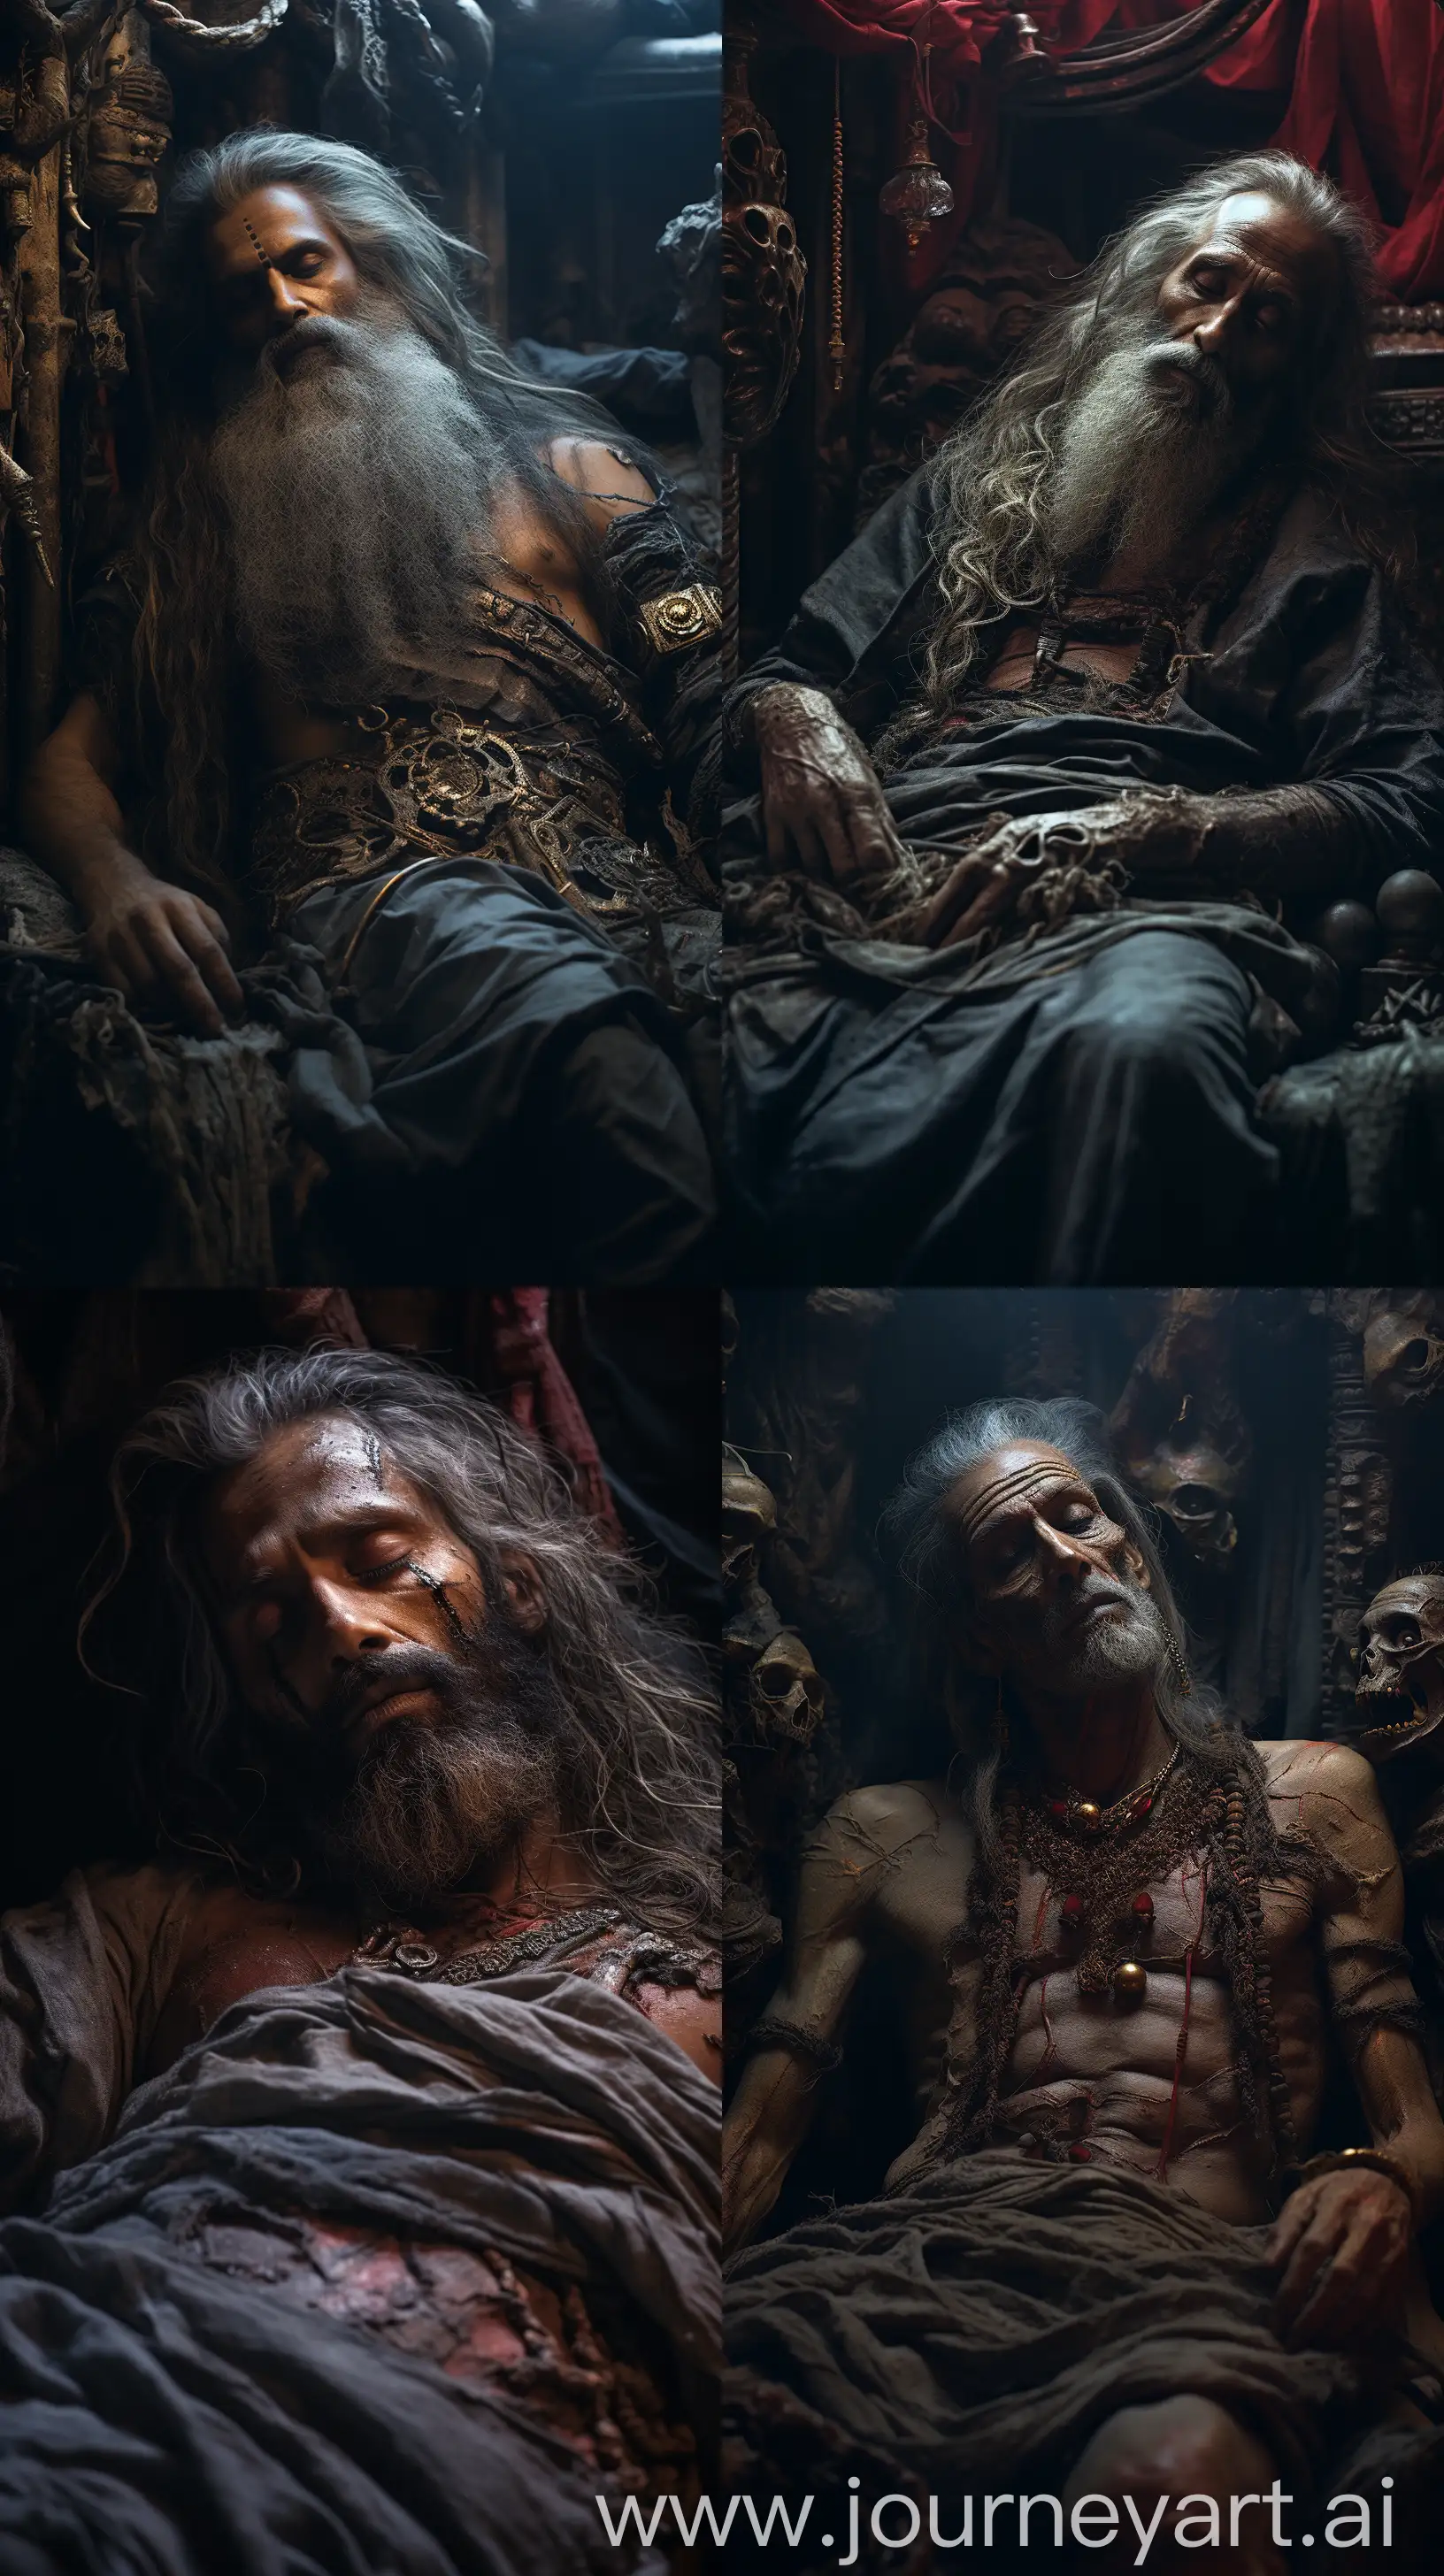 Ancient-Indian-Warrior-Resurrected-Amidst-War-in-Intricate-8K-Detail